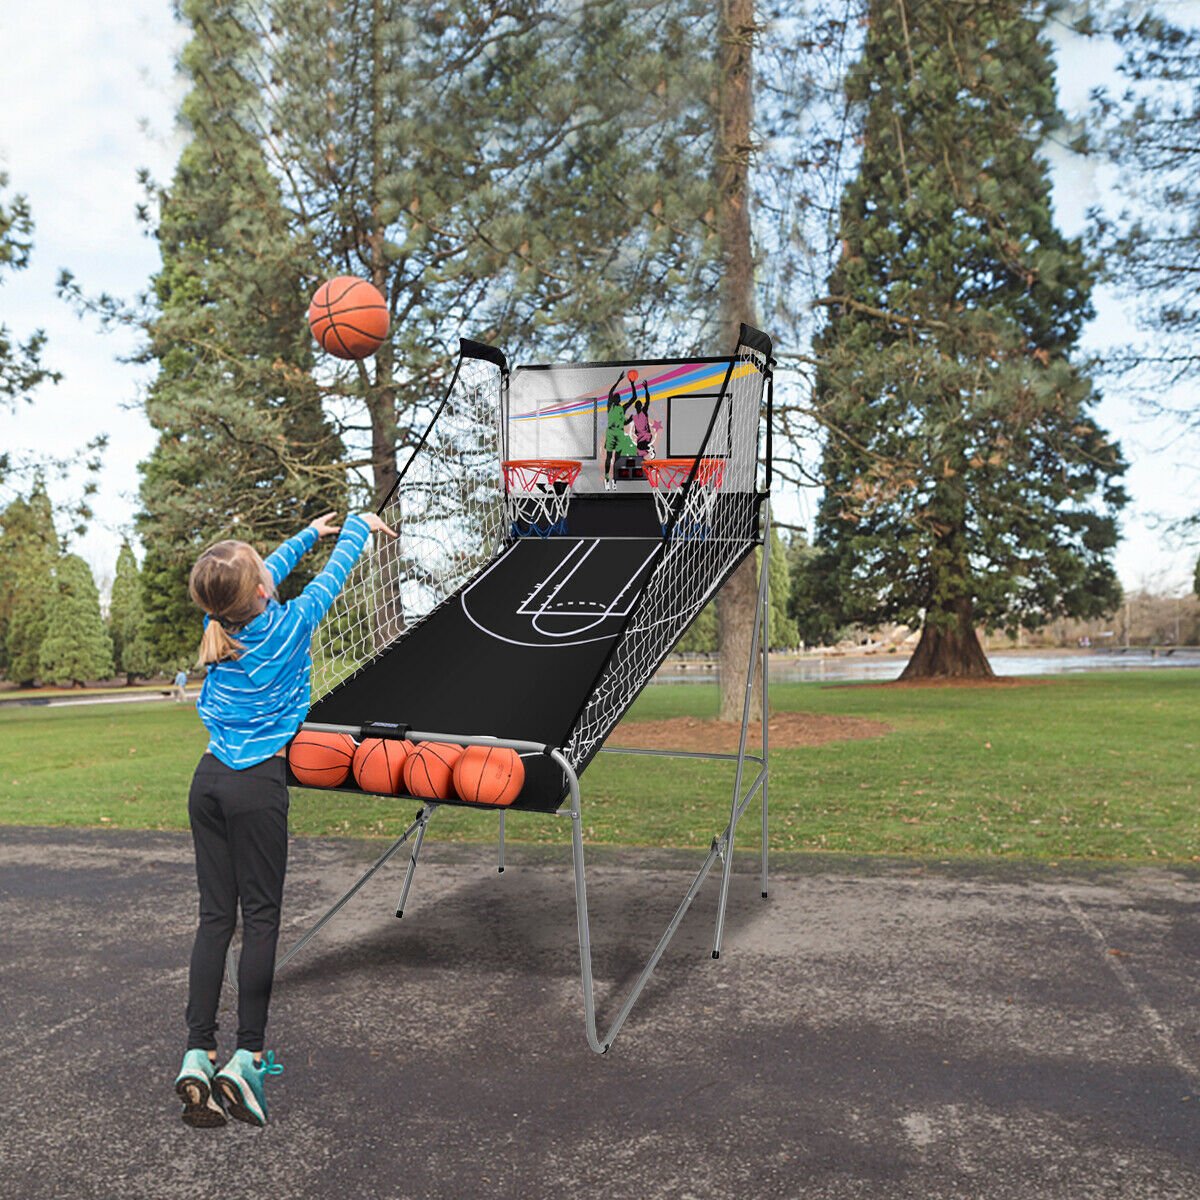 Kids Basketball Arcade Game - Buy Today for Family Fun!